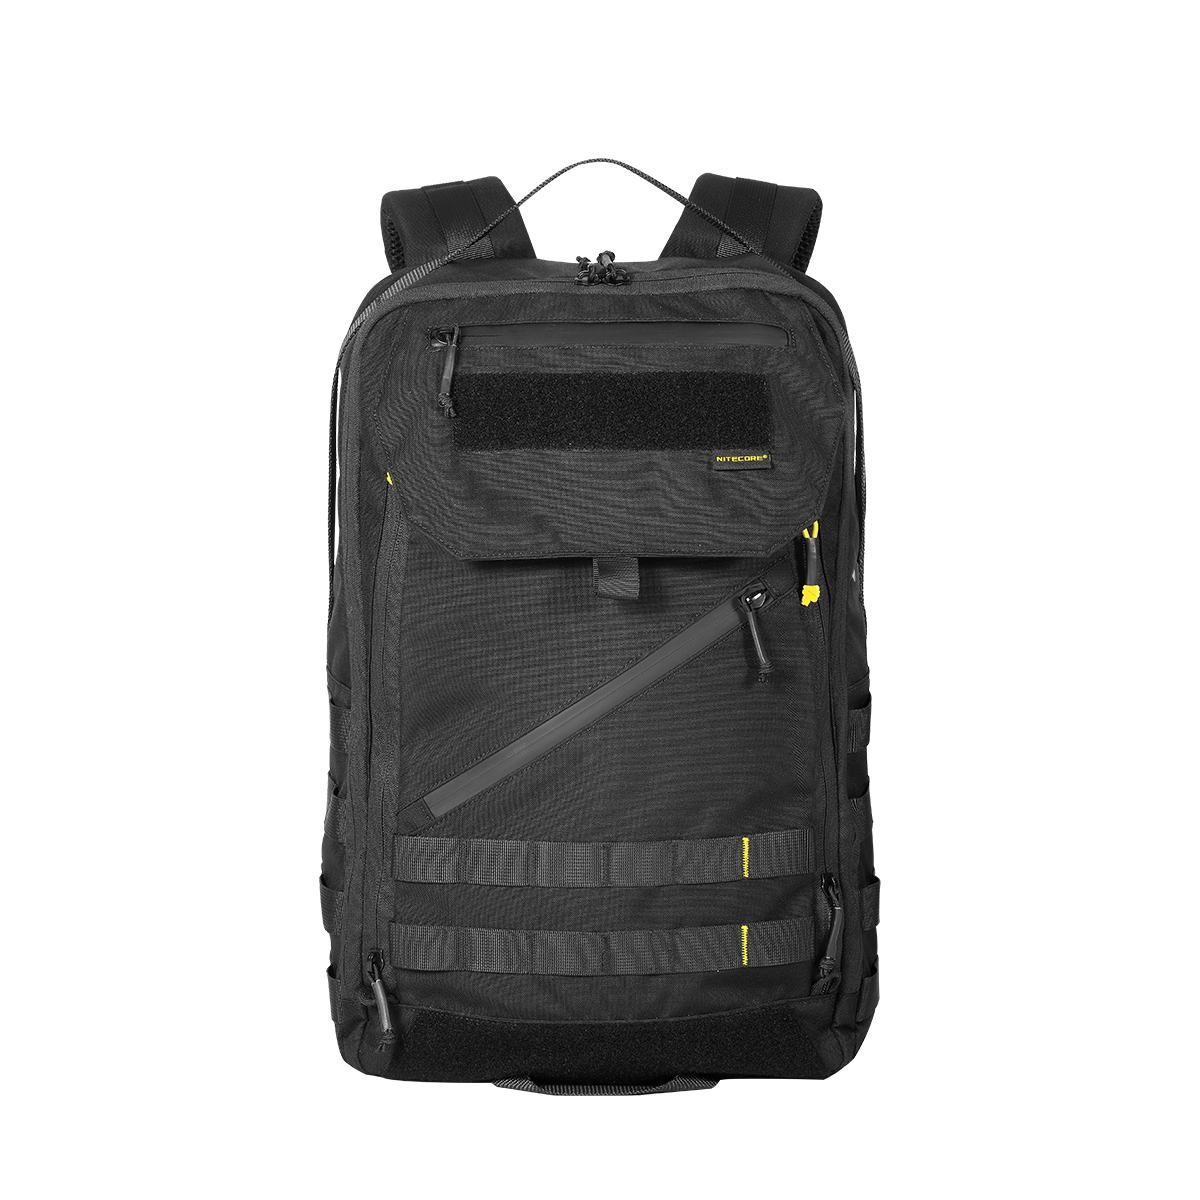 BP23 PRO QUICK ACCESS BACKPACK - 23L CAPACITY –  Singapore